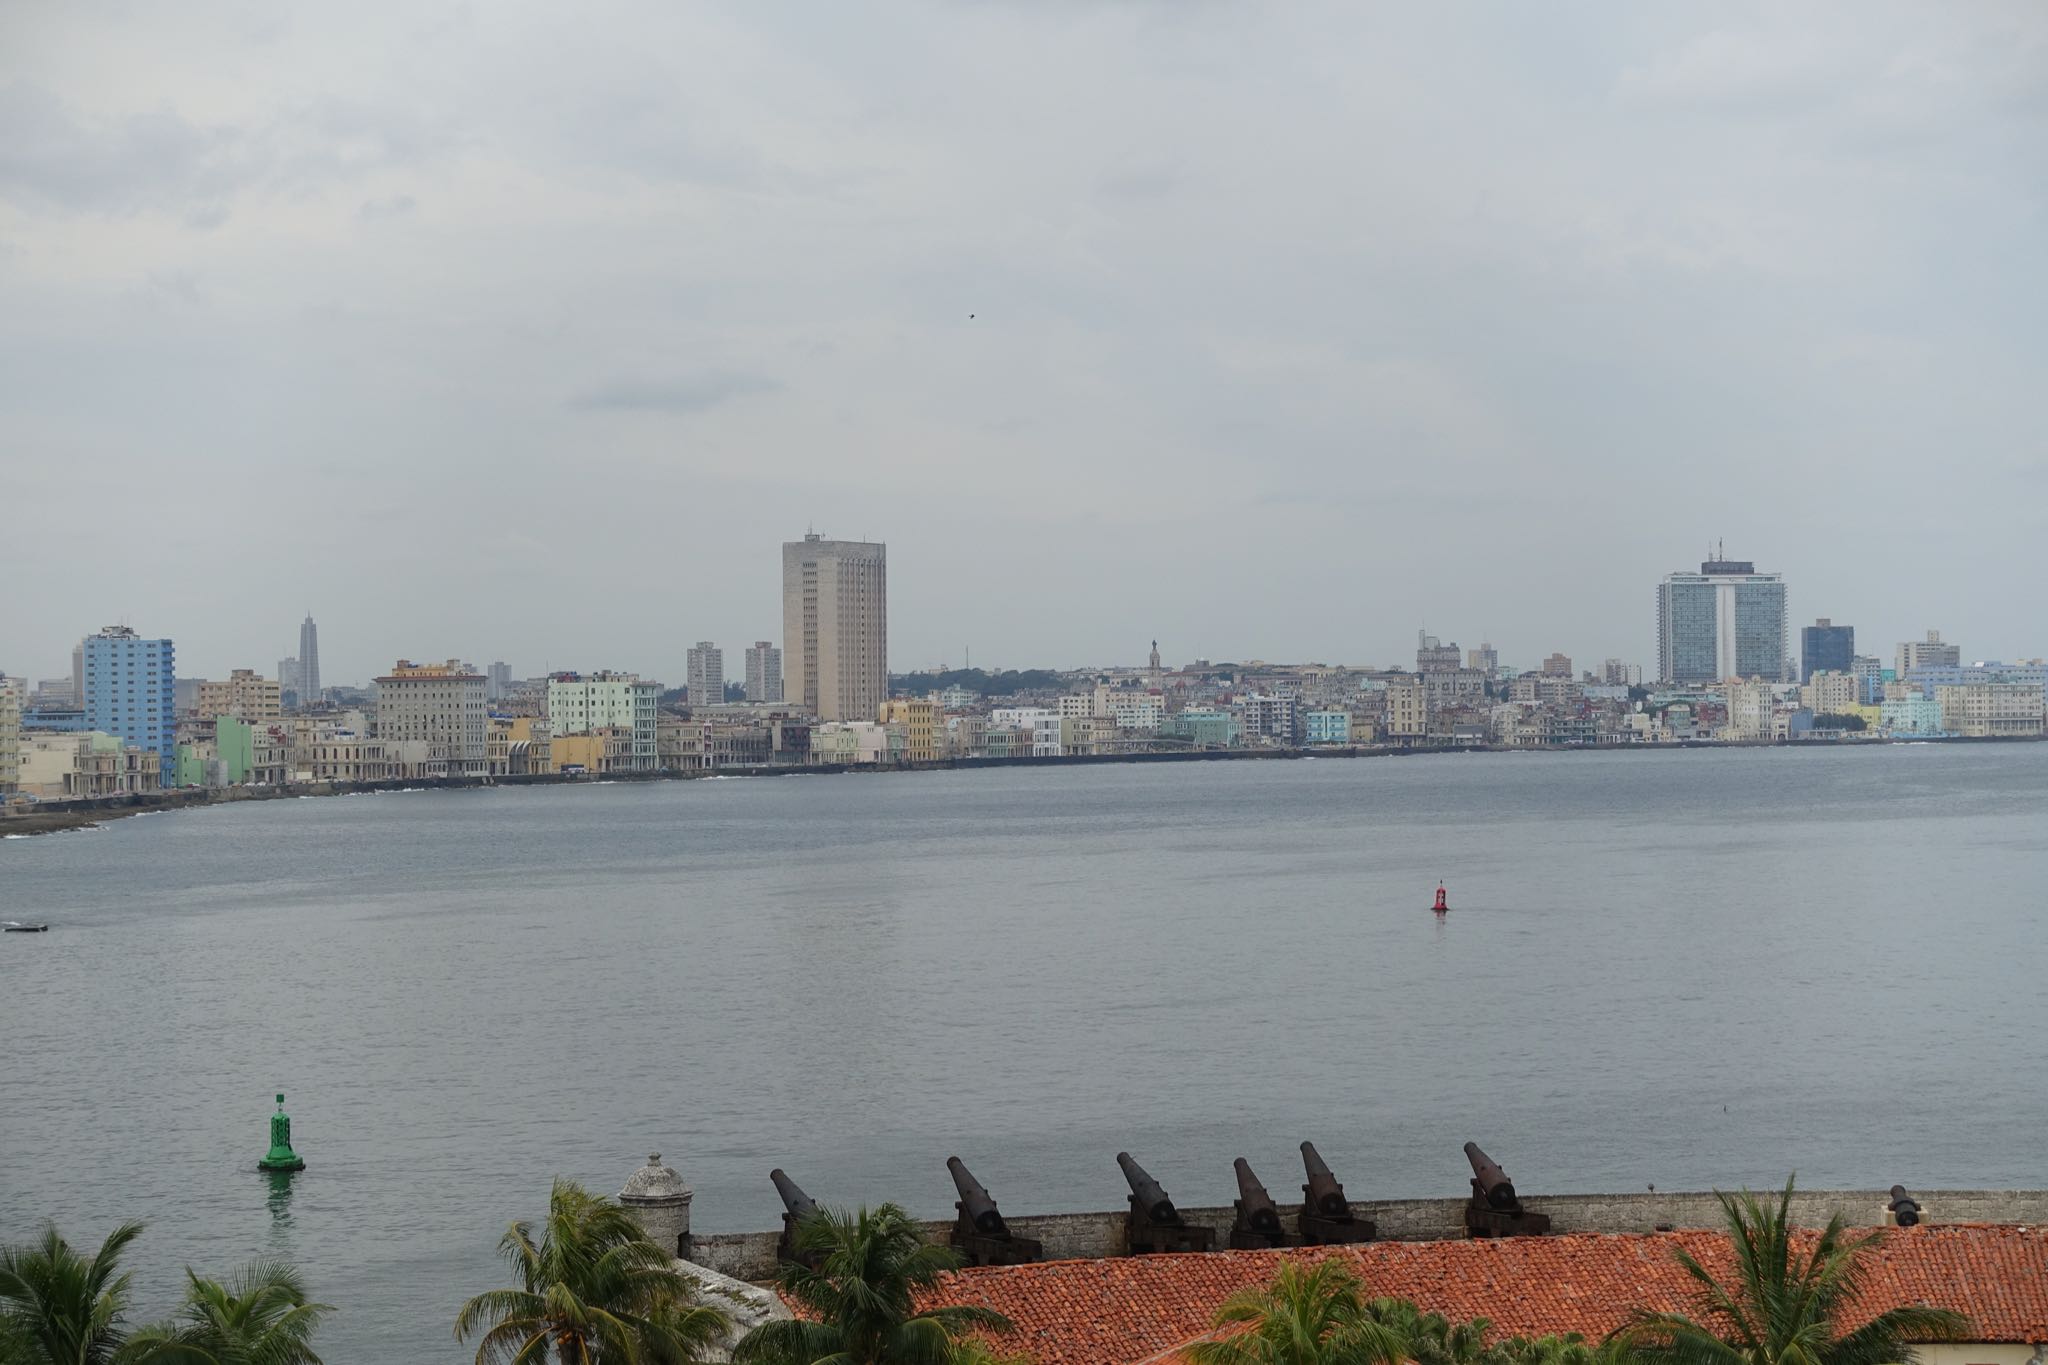 Photo 41 of 221 from the album Highlights Cuba 2019.